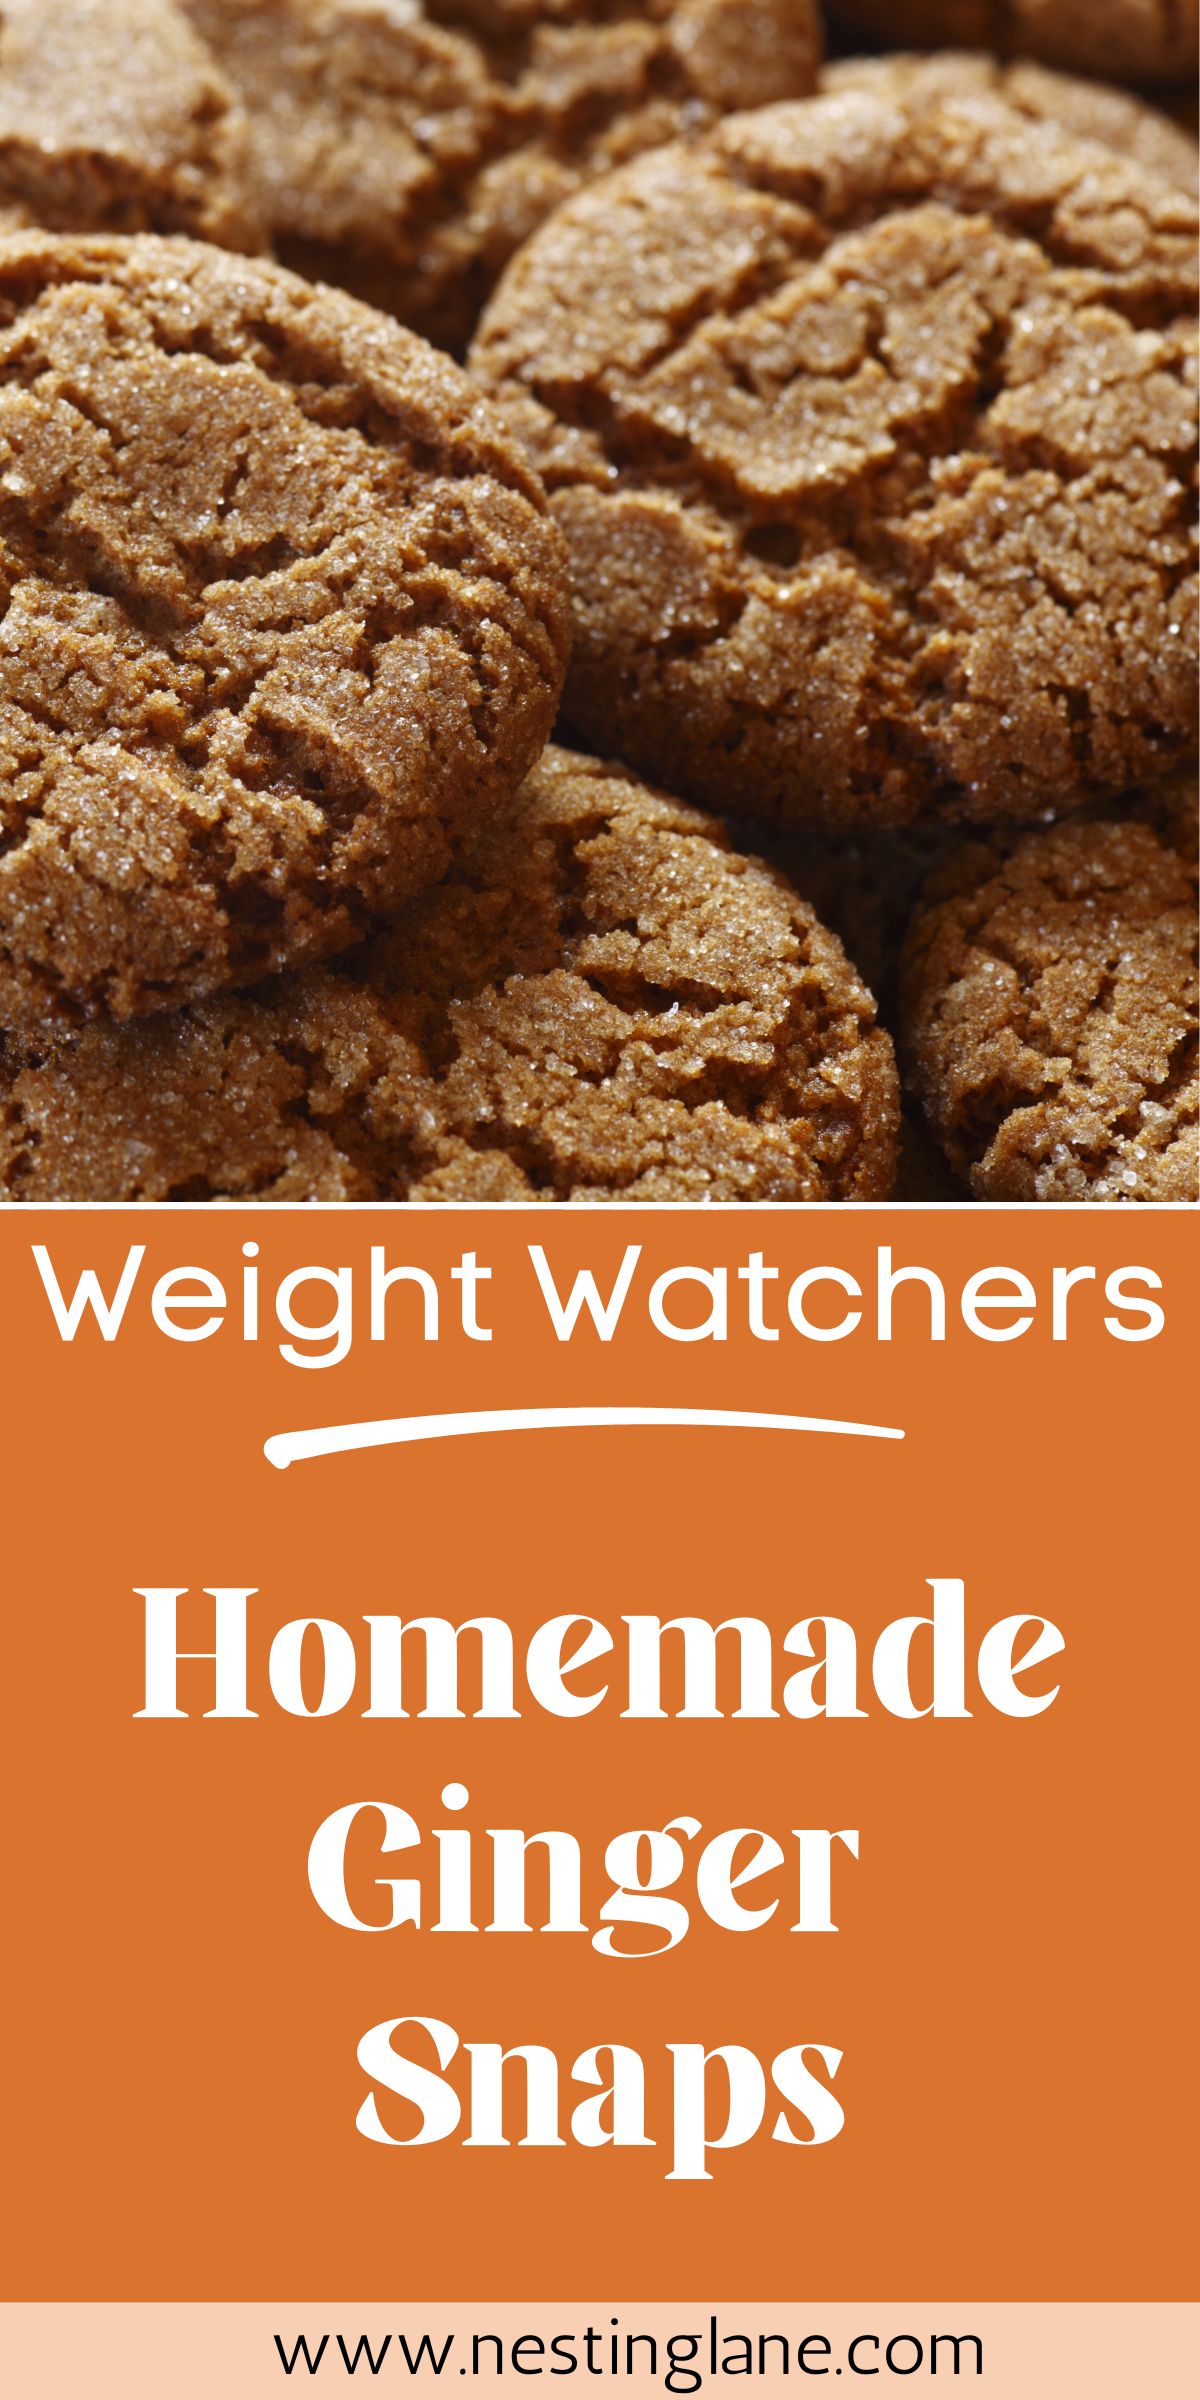 Graphic for Pinterest of Homemade Weight Watchers Ginger Snaps Recipe.